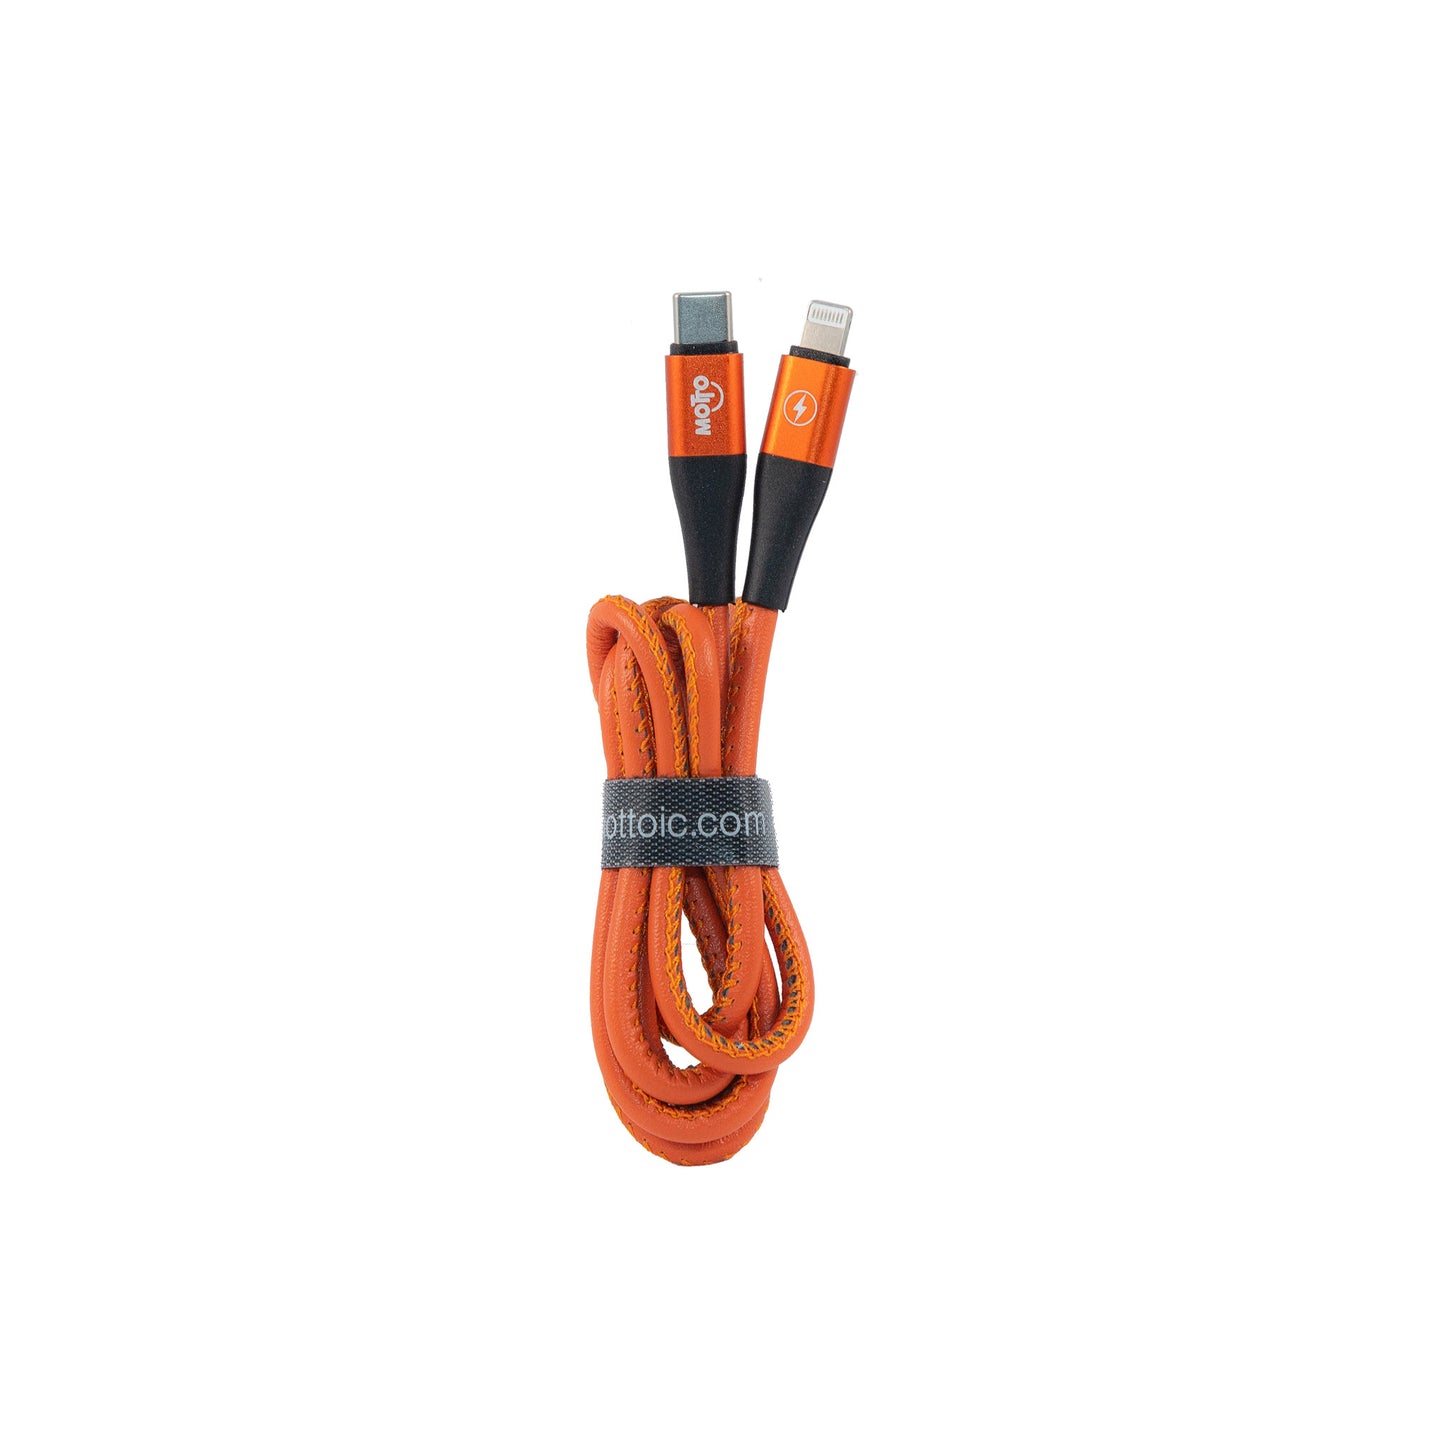 [MOTTO IC] Leather Wrapped Type-C to iPhone Charger 3FT Lightning to USB Charging Cable